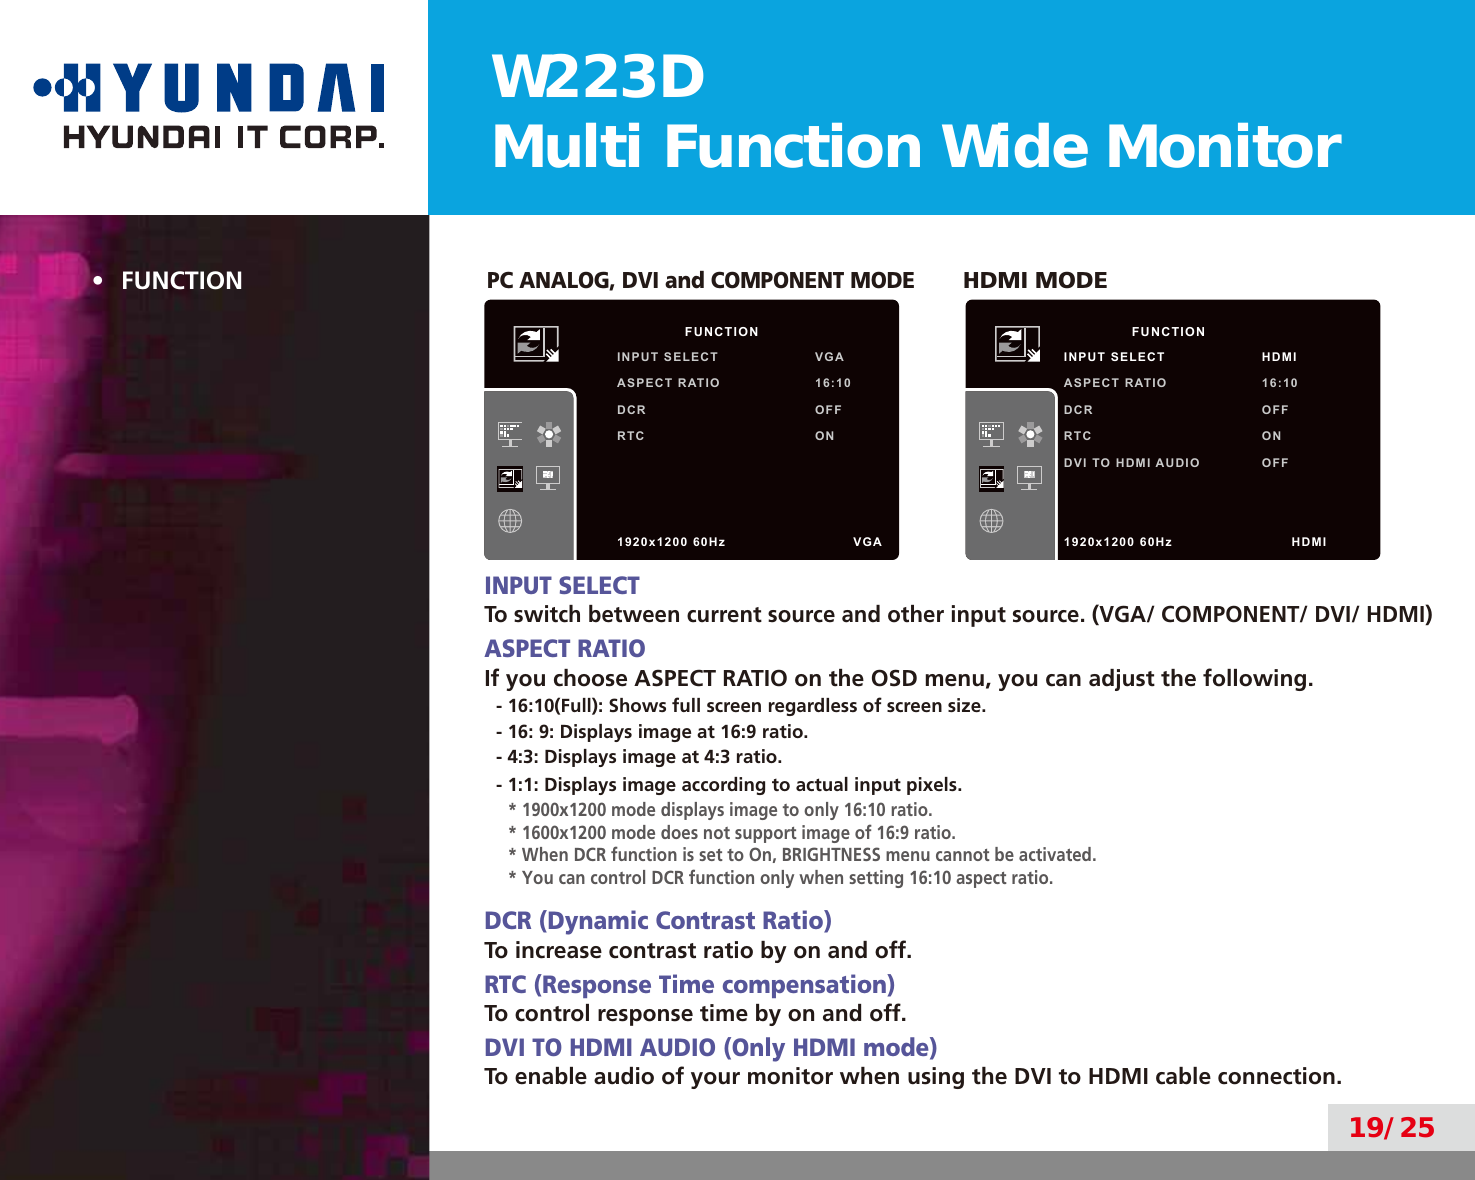 W223DMulti Function Wide Monitor19/25•  FUNCTIONPC ANALOG, DVI and COMPONENT MODE       HDMI MODEINPUT SELECTTo switch between current source and other input source. (VGA/ COMPONENT/ DVI/ HDMI)ASPECT RATIOIf you choose ASPECT RATIO on the OSD menu, you can adjust the following.- 16:10(Full): Shows full screen regardless of screen size.- 16: 9: Displays image at 16:9 ratio.- 4:3: Displays image at 4:3 ratio.- 1:1: Displays image according to actual input pixels.* 1900x1200 mode displays image to only 16:10 ratio.* 1600x1200 mode does not support image of 16:9 ratio.* When DCR function is set to On, BRIGHTNESS menu cannot be activated.* You can control DCR function only when setting 16:10 aspect ratio.DCR (Dynamic Contrast Ratio)To increase contrast ratio by on and off.RTC (Response Time compensation)To control response time by on and off.DVI TO HDMI AUDIO (Only HDMI mode)To enable audio of your monitor when using the DVI to HDMI cable connection.        FUNCTIONINPUT SELECT VGAASPECT RATIO 16:10DCR OFFRTC ON1920x1200 60Hz               VGA        FUNCTIONINPUT SELECT HDMIASPECT RATIO 16:10DCR OFFRTC ONDVI TO HDMI AUDIO OFF1920x1200 60Hz              HDMI